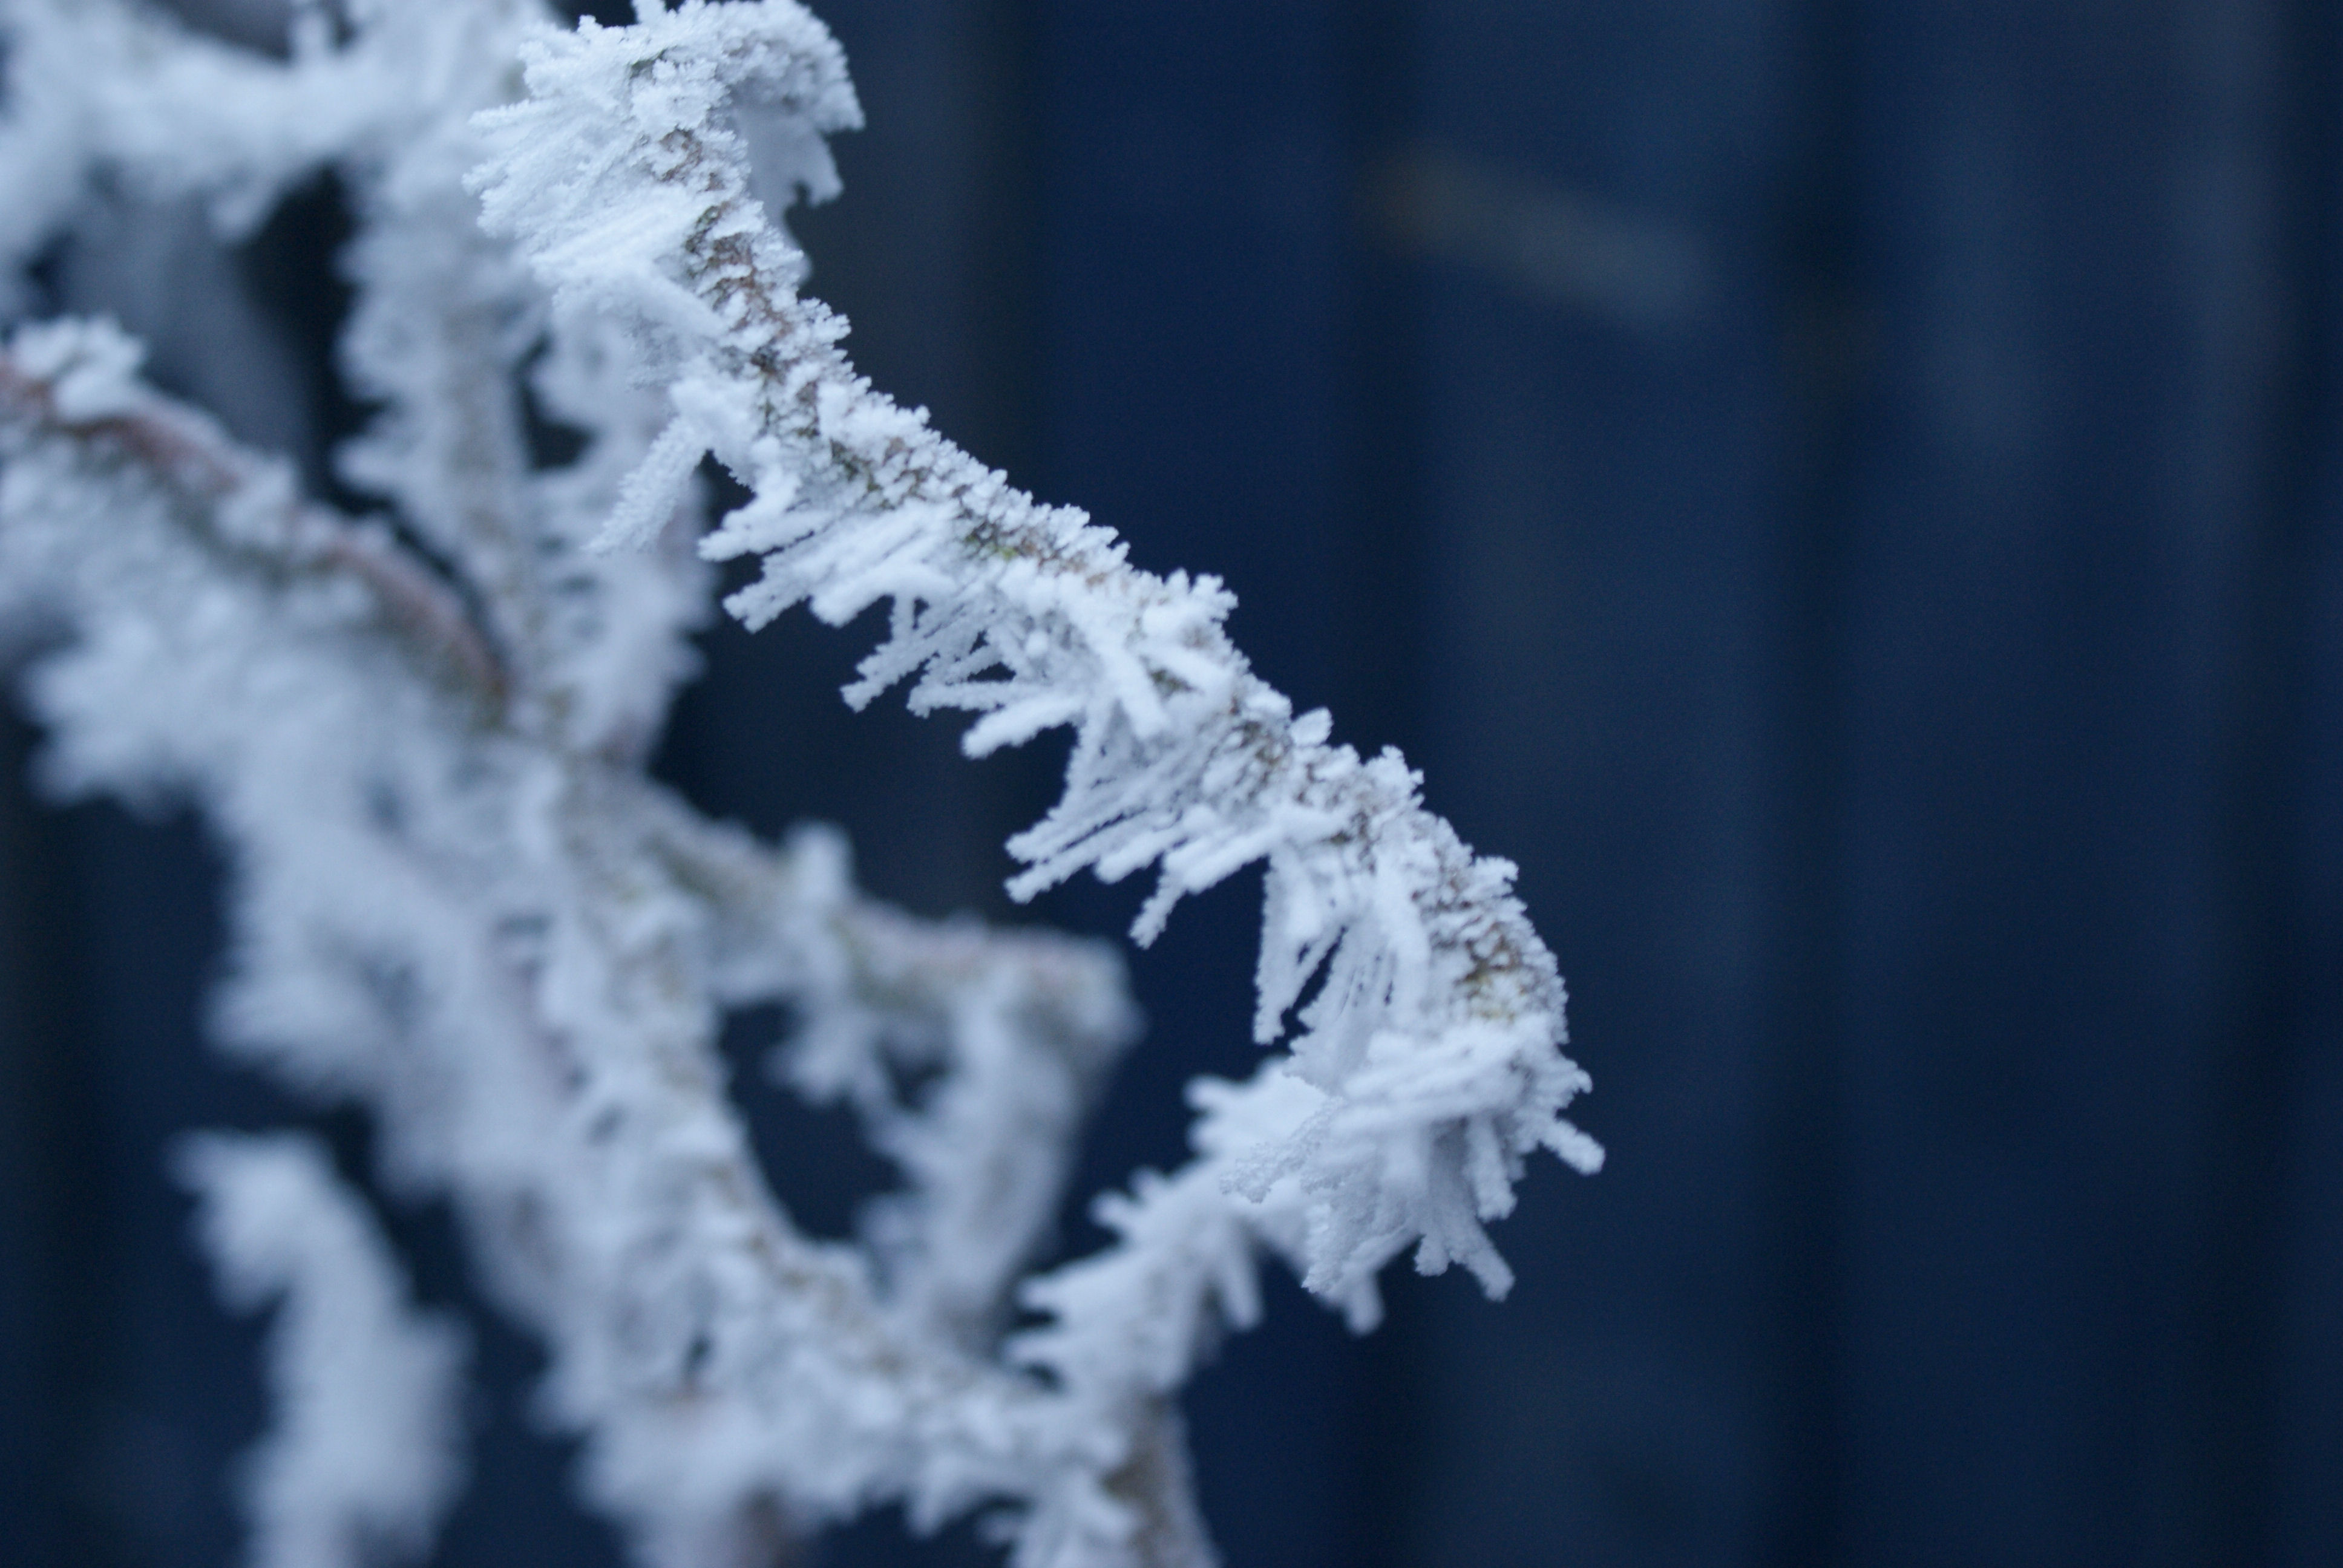 This frost was created during strong northerly winds creating horizontal filaments from the branches